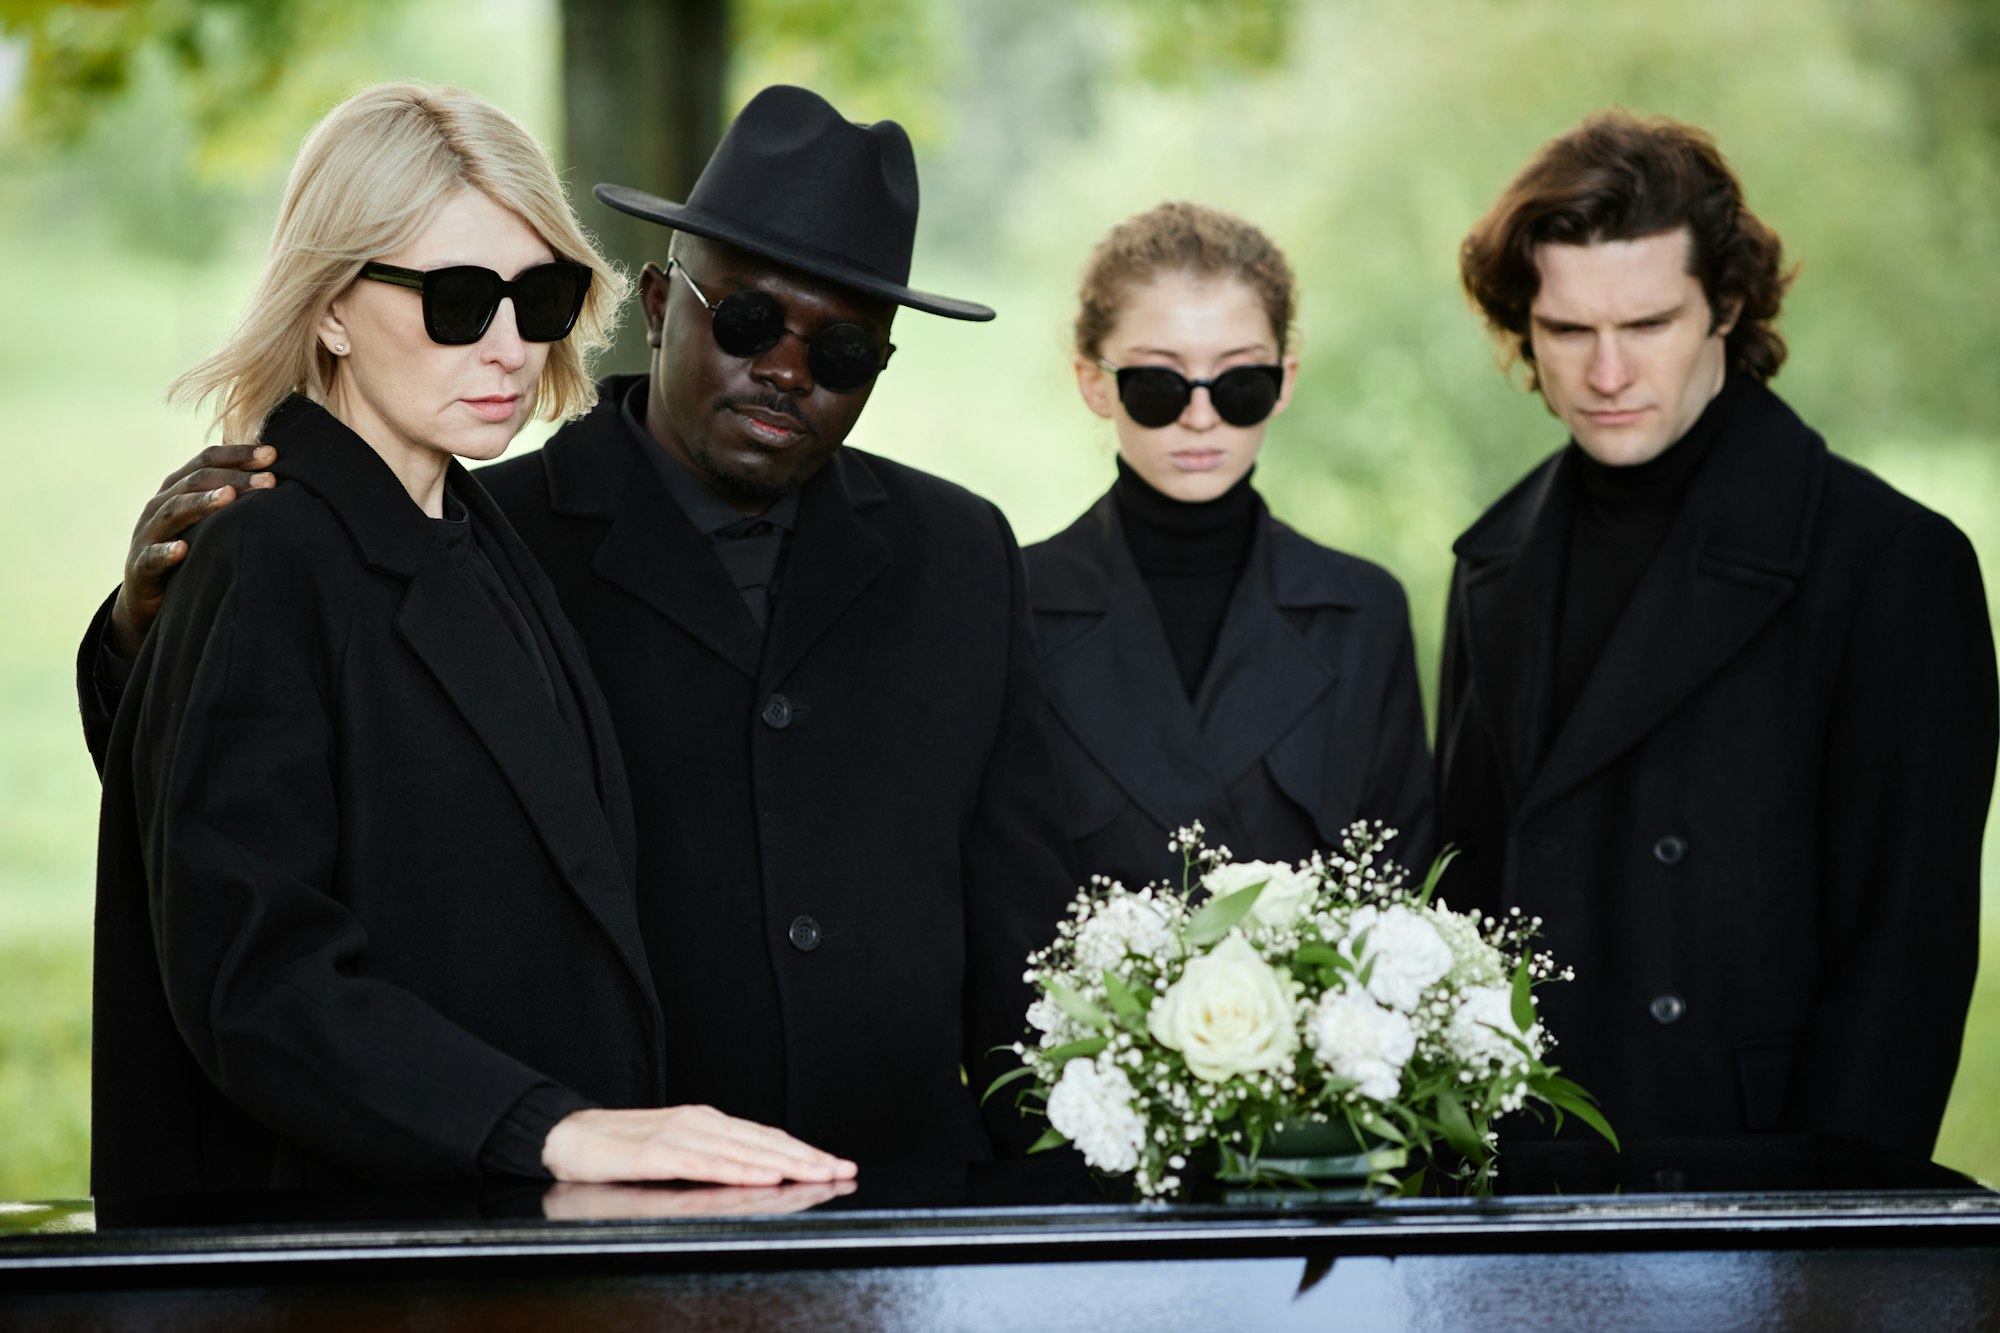 Group of people standing by coffin at outdoor funeral